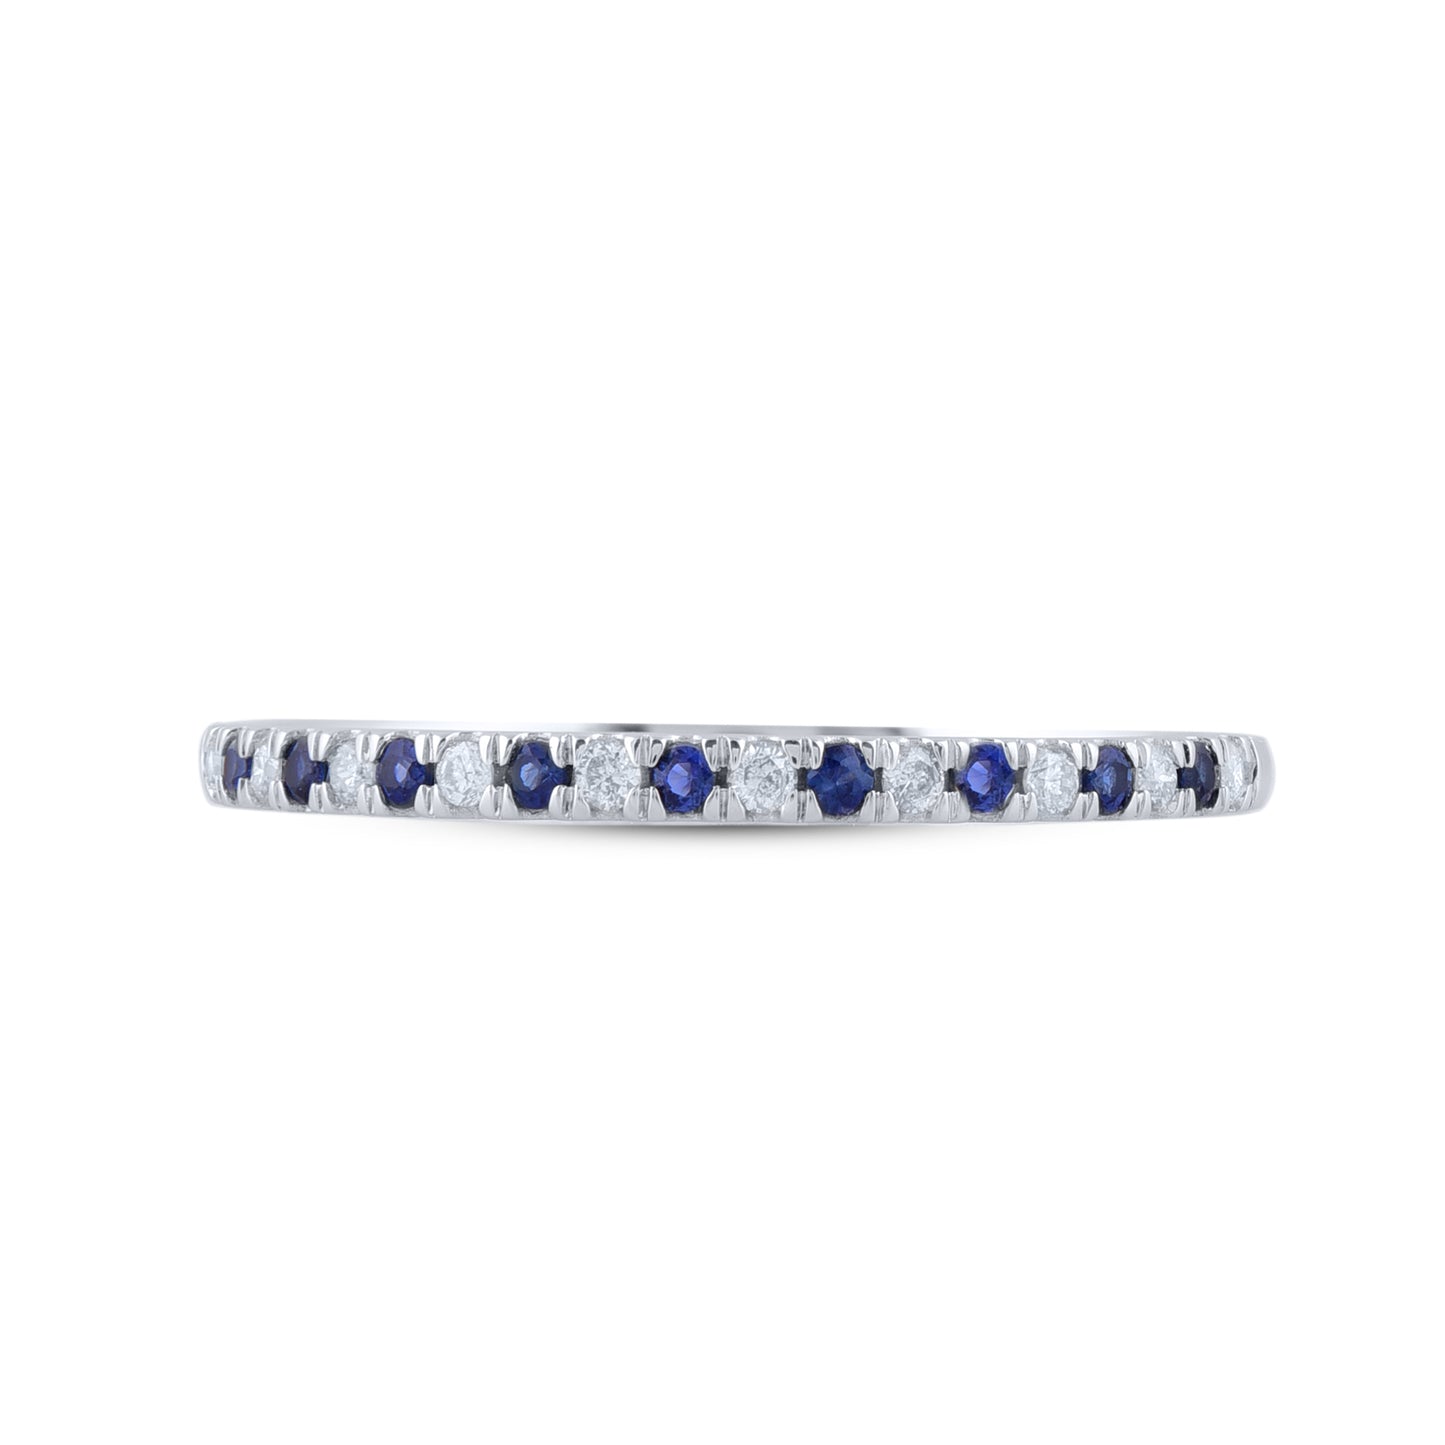 Diamond and Blue Sapphire Stackable Band Ring in 10K Gold